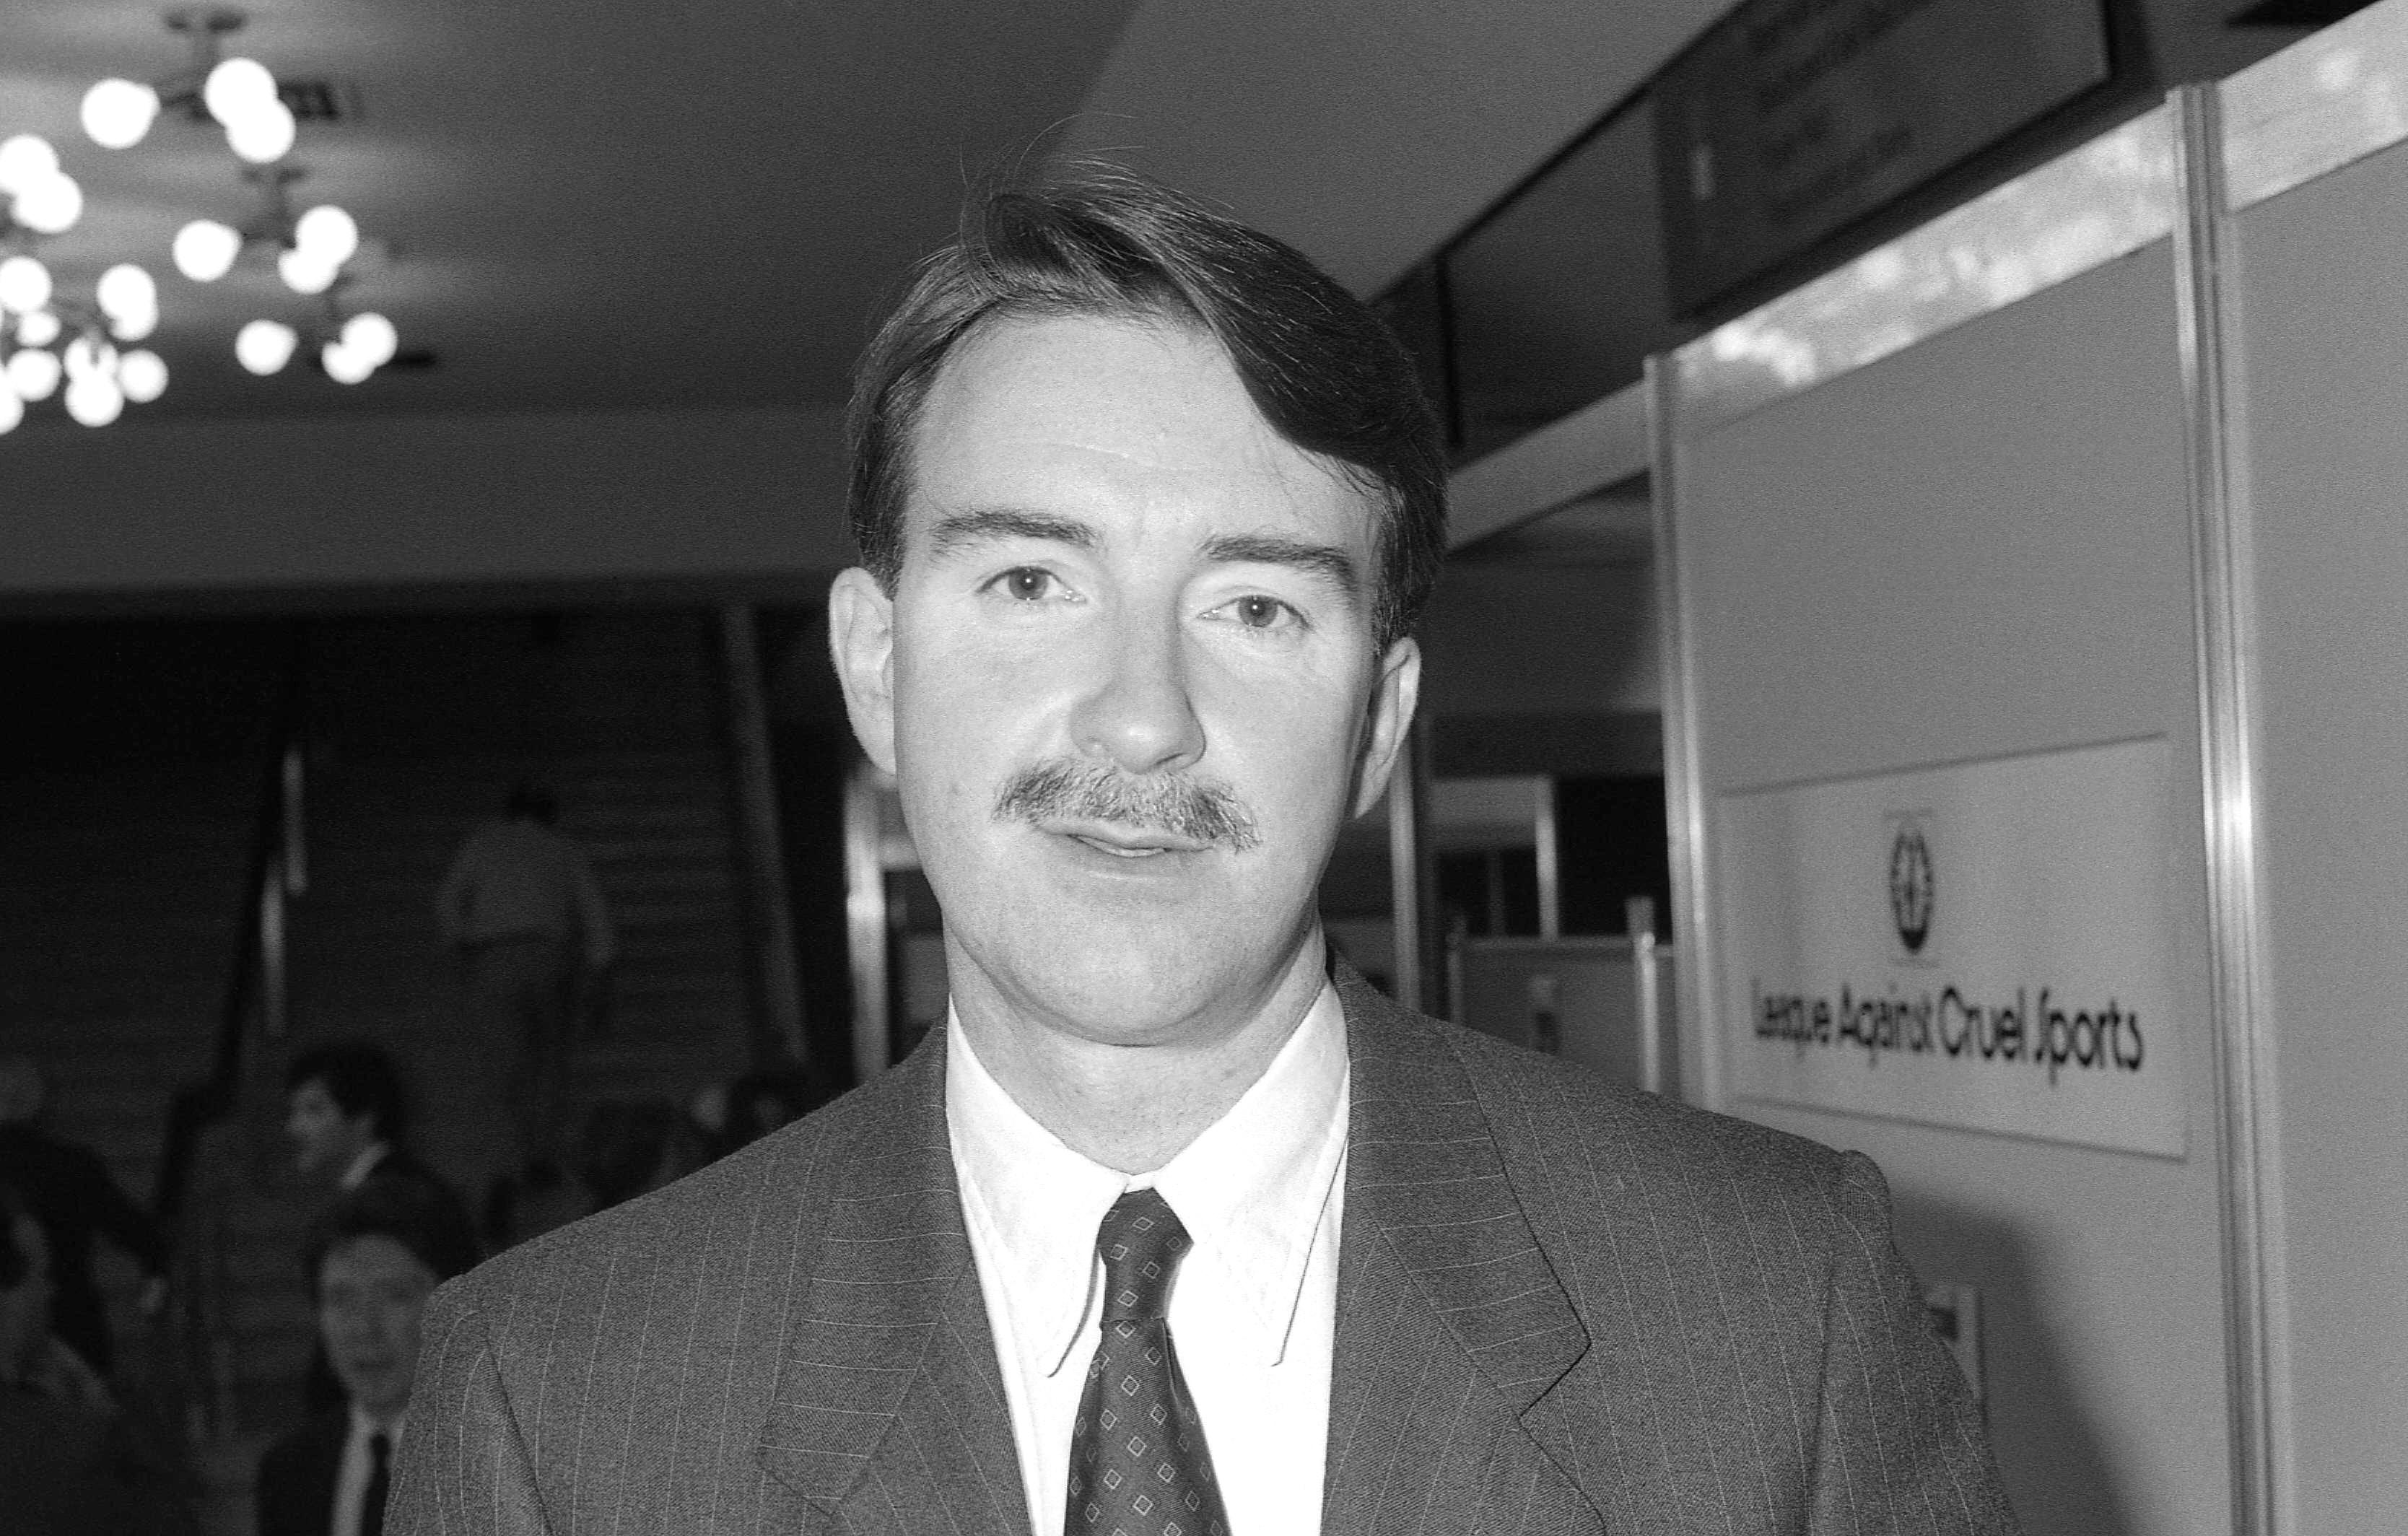 Mandelson critics pointed to his 1980s style choices, such as his decision to sport a bushy moustache